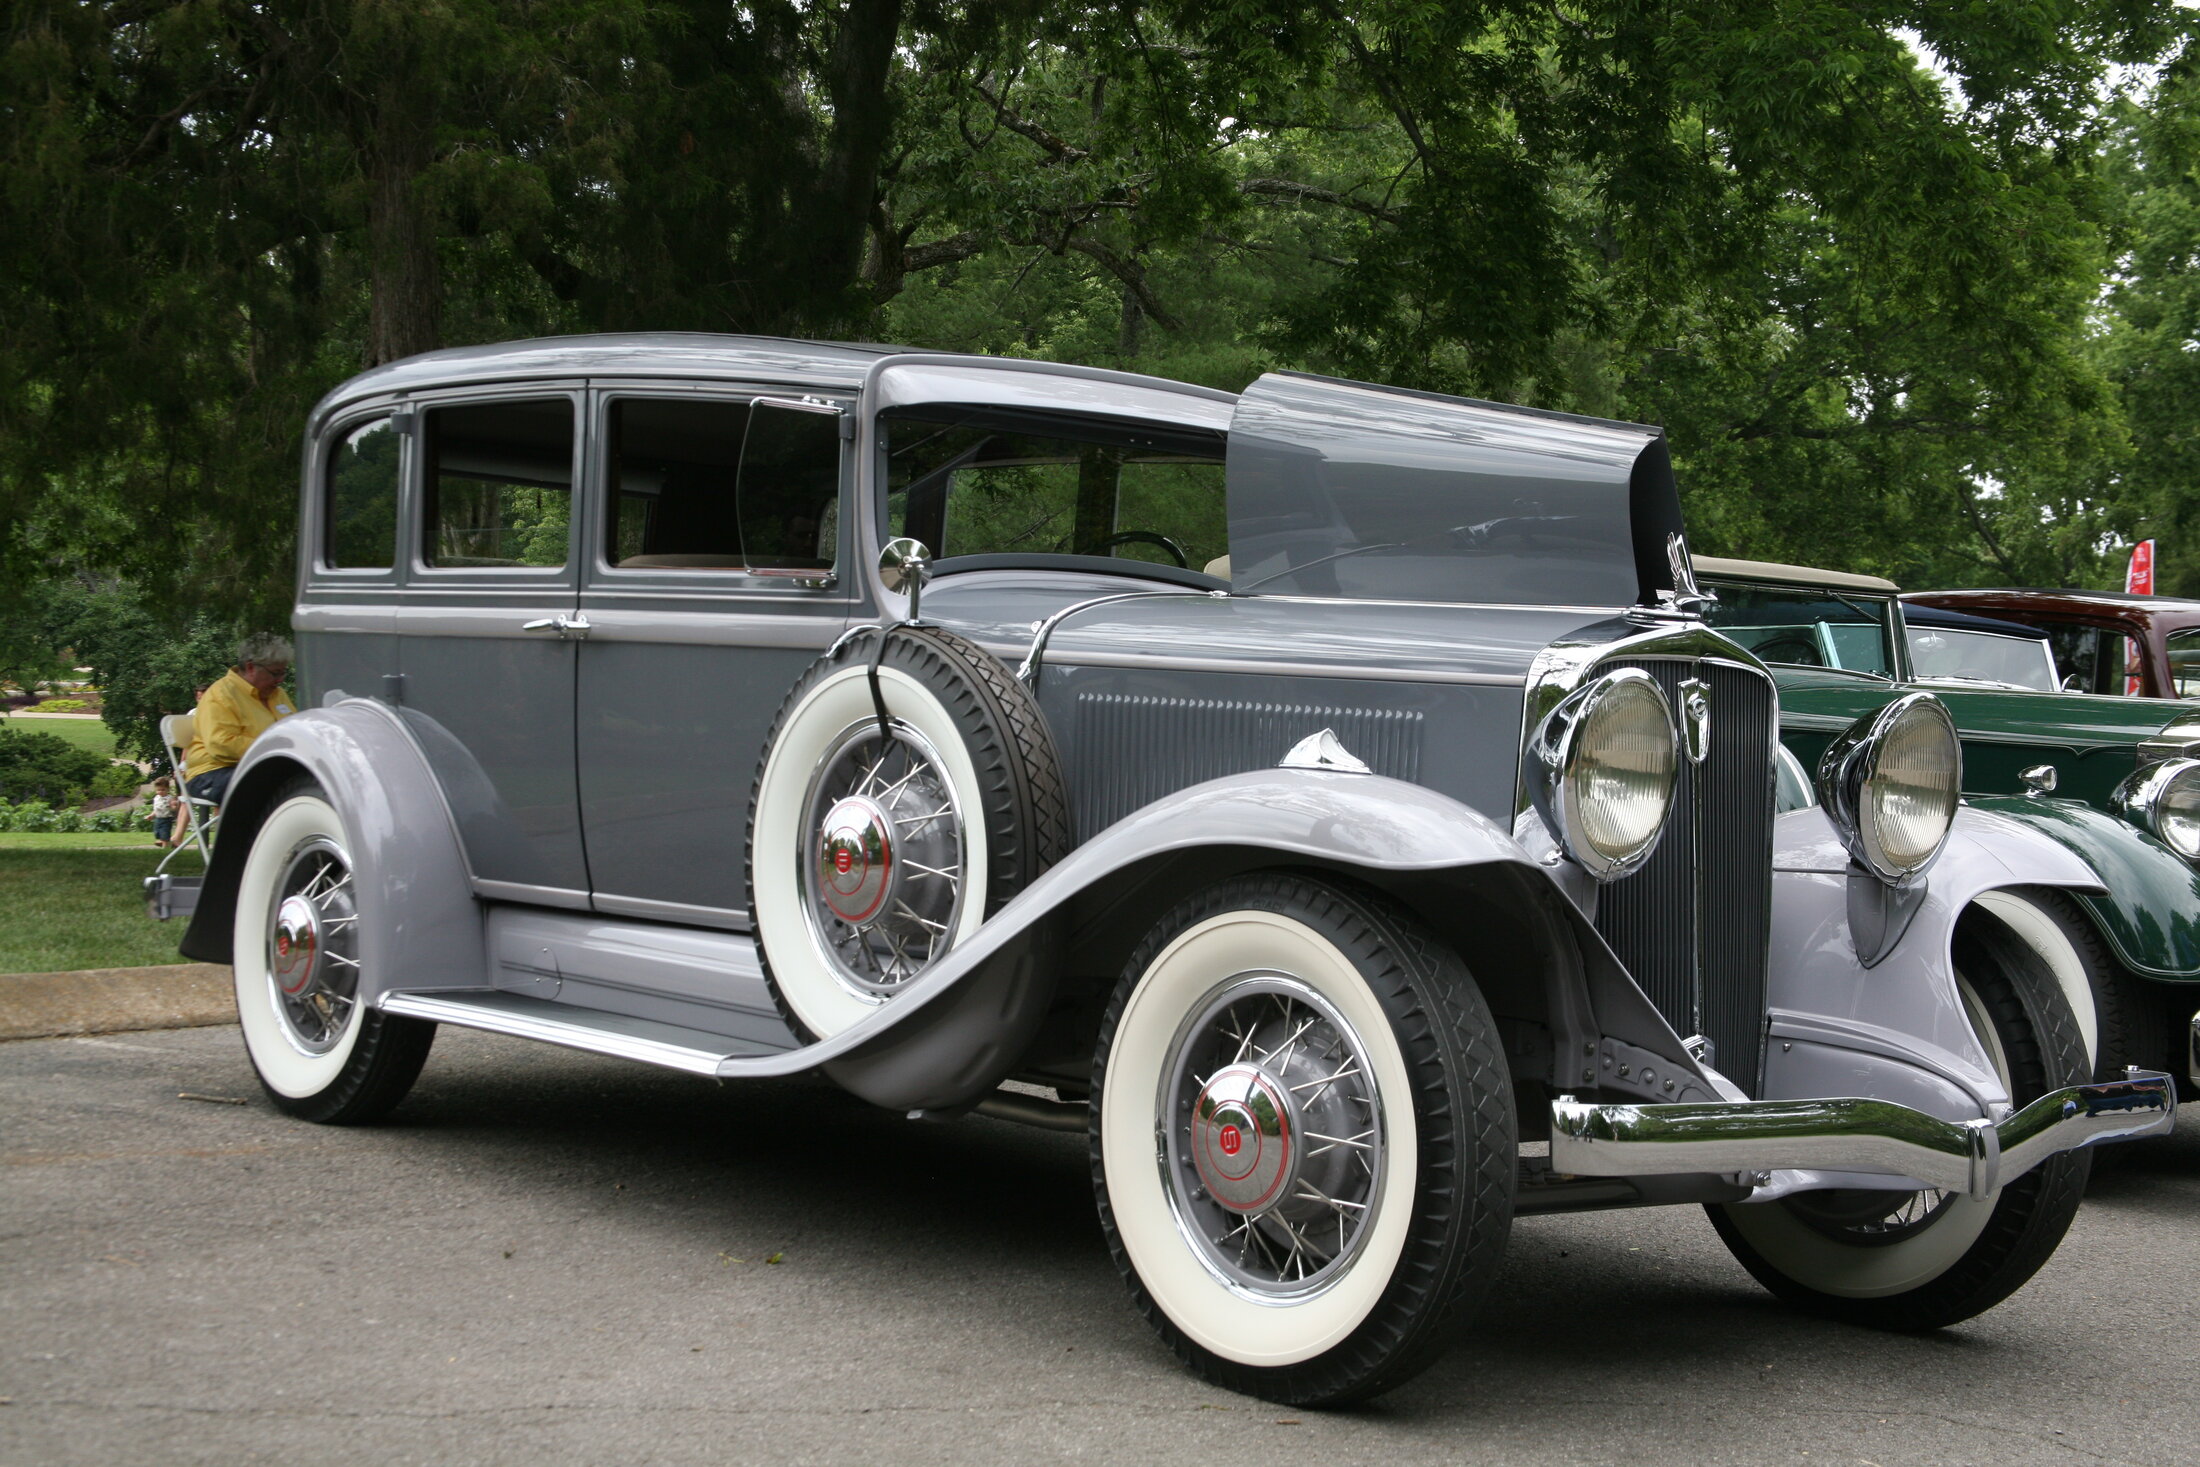 Exposition of Elegance: Classic Cars at Cheekwood 2023. Photos by J. Neiland Pennington.